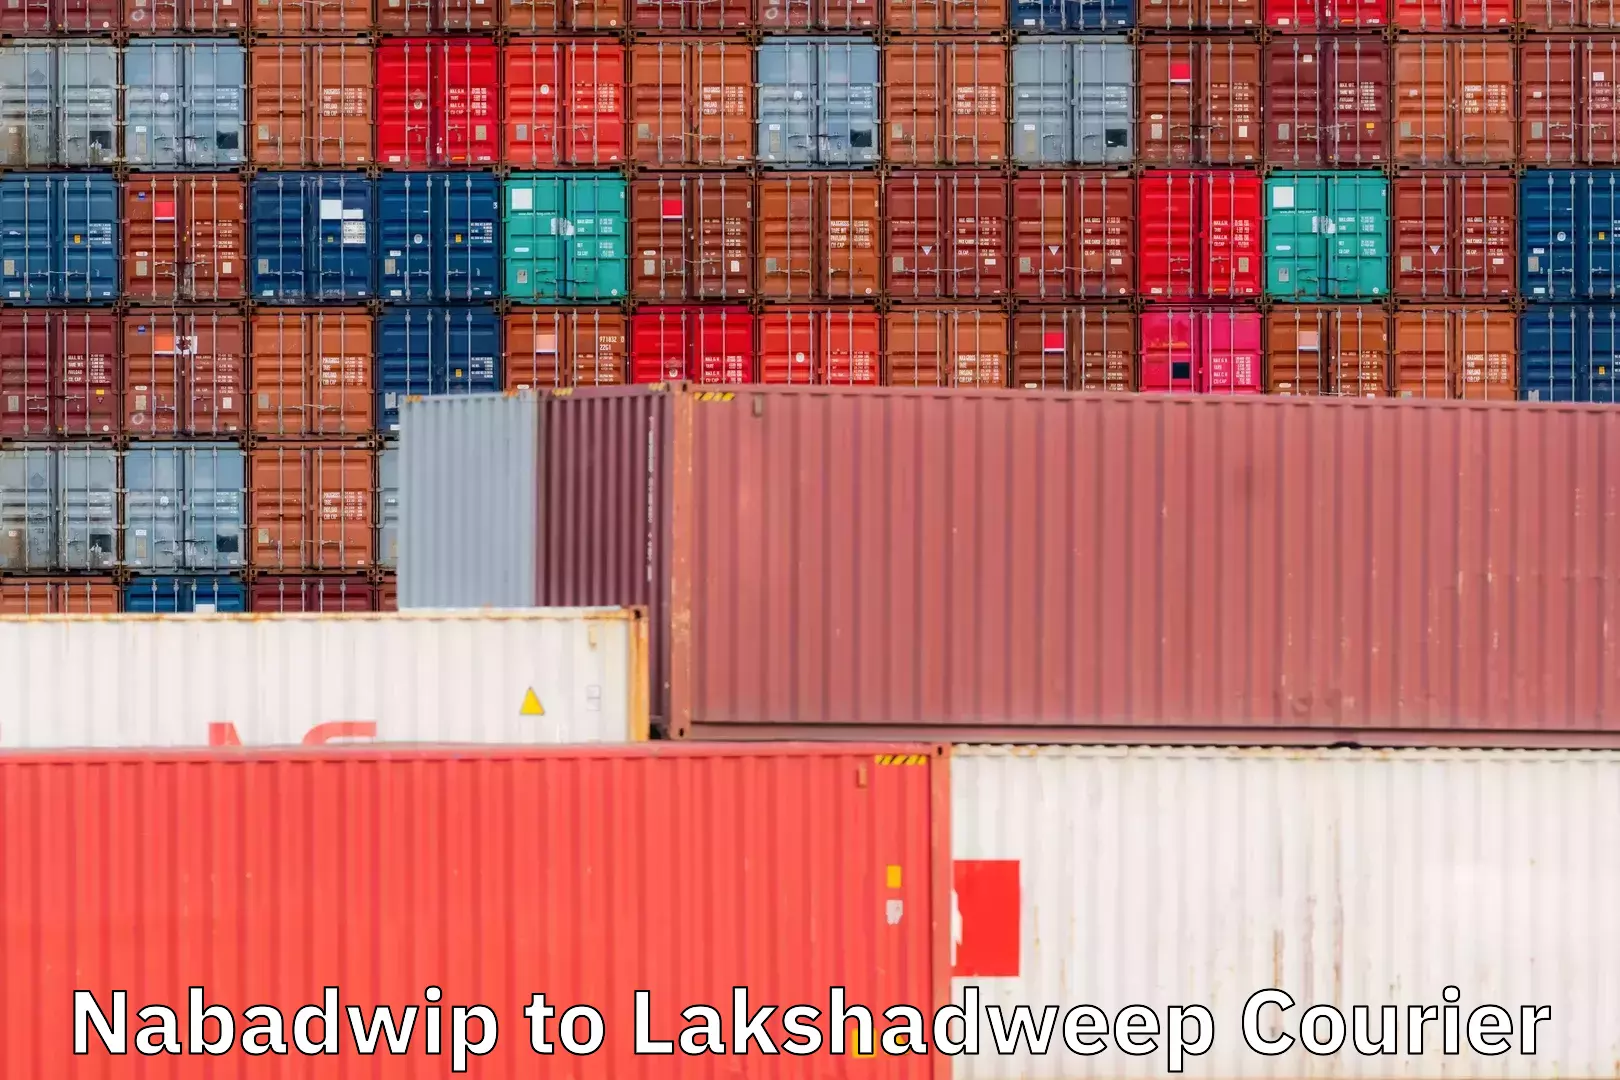 Full-service courier options in Nabadwip to Lakshadweep